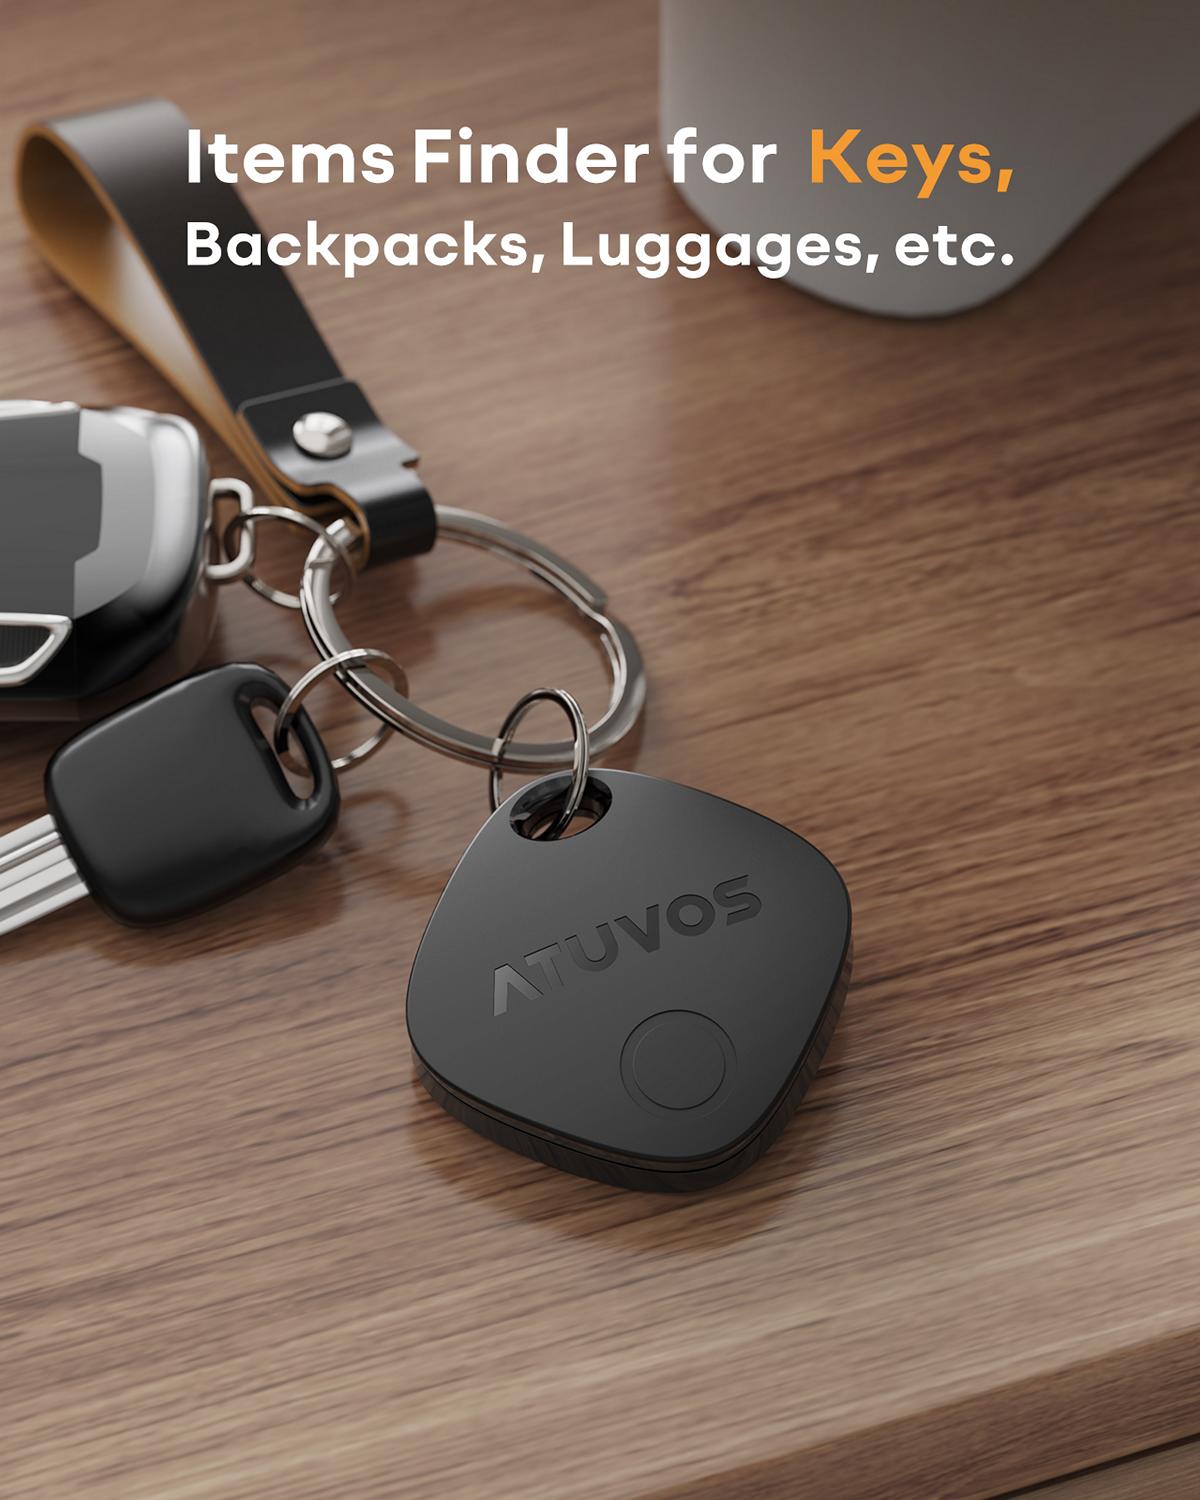 ATUVOS Black Versatile Tracker 1 PCS (iOS Only,Not Available in AUS and JPN)